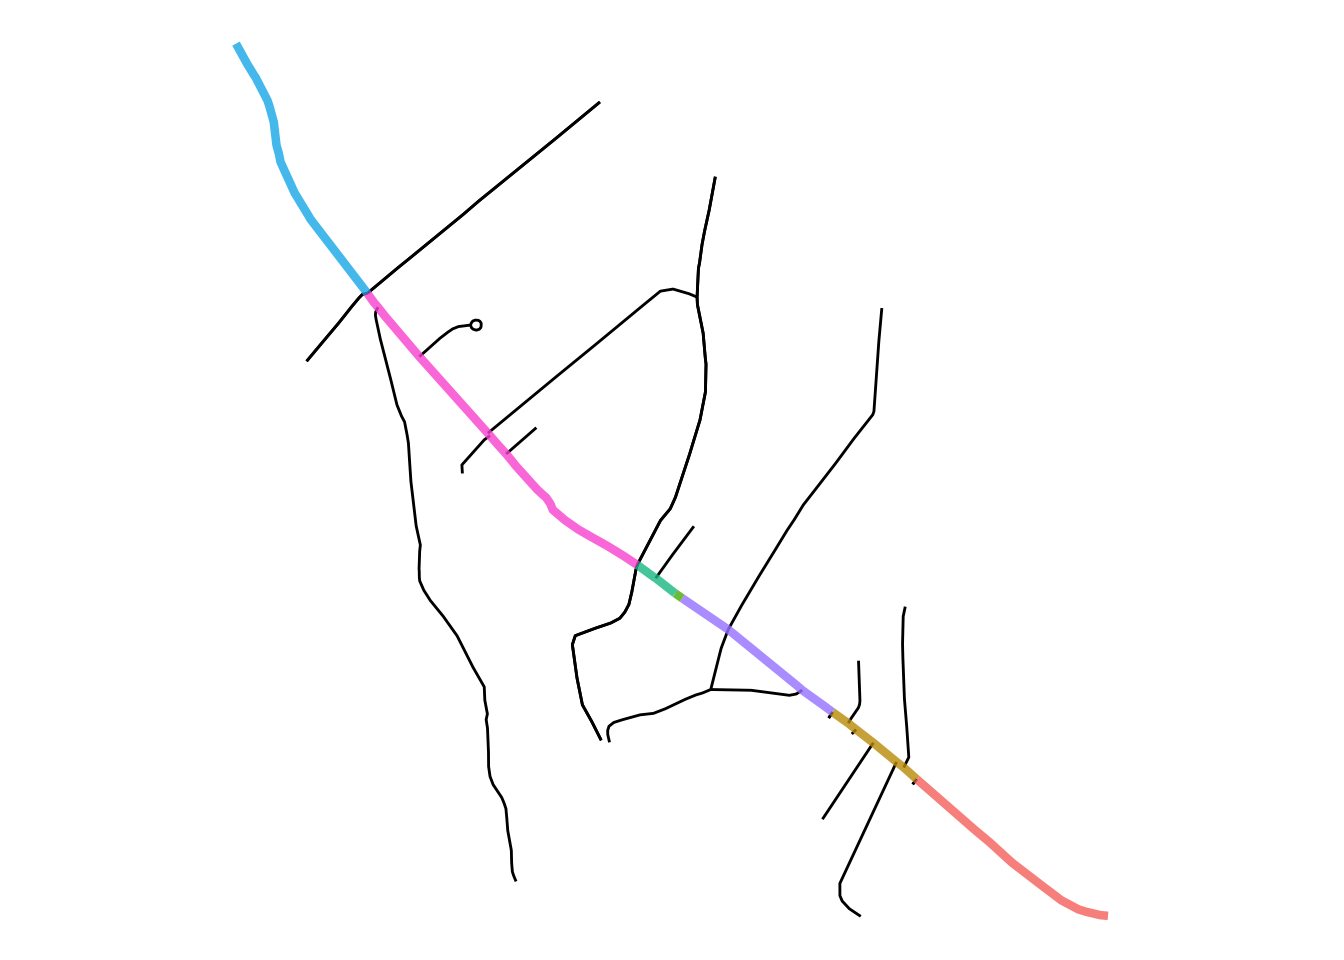 A small part of a line map, in particular the road running from the top left to the bottom right in the previous figures, along with roads branching off of it. The main road is broken into seven colours, while there are about fifteen to twenty roads branching off from it in thinner black lines.